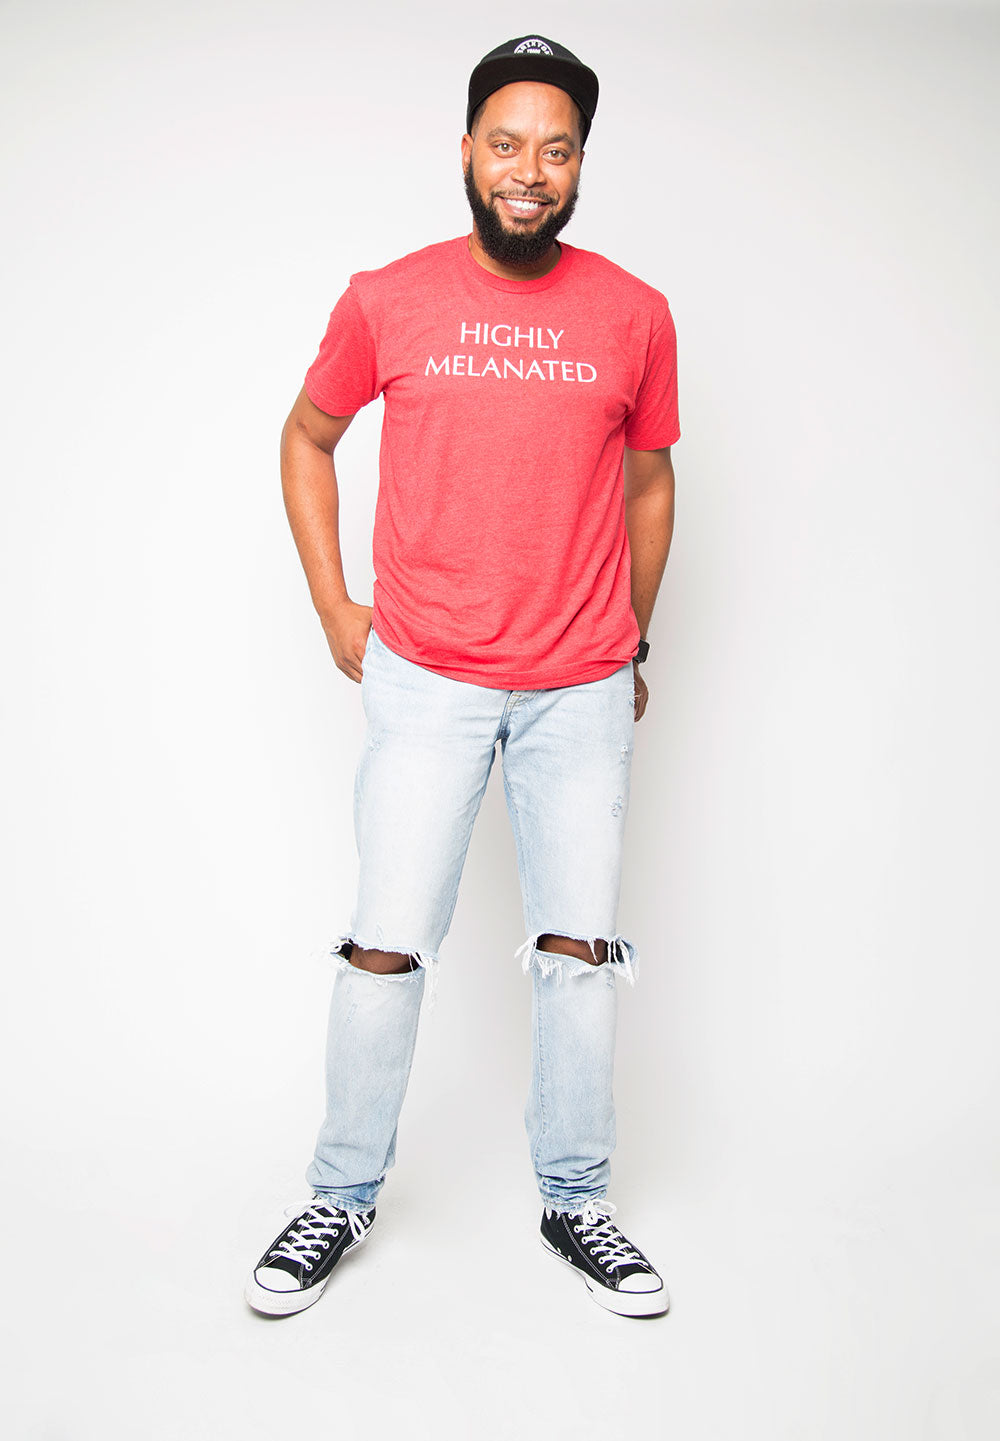 Highly Melanated Shirt in Red - Trunk Series